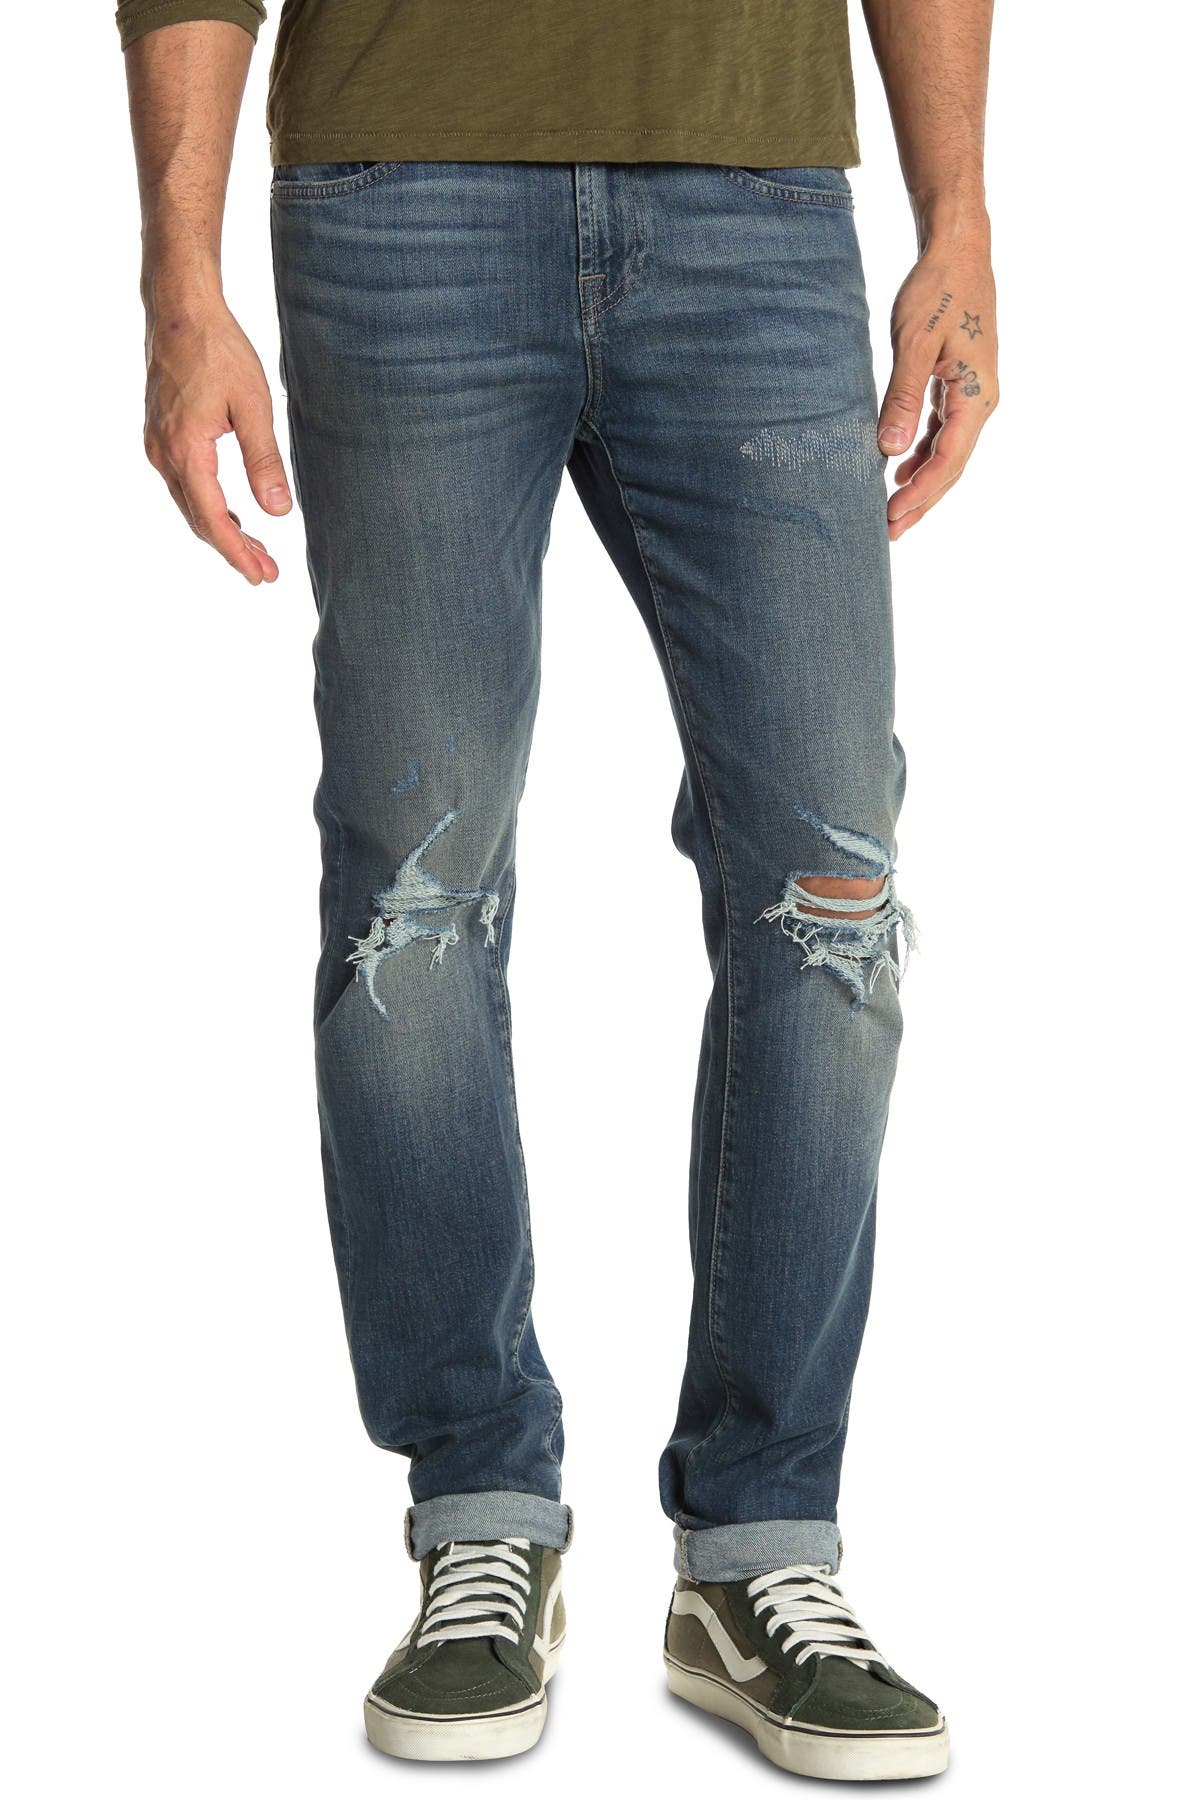 paxtyn jeans